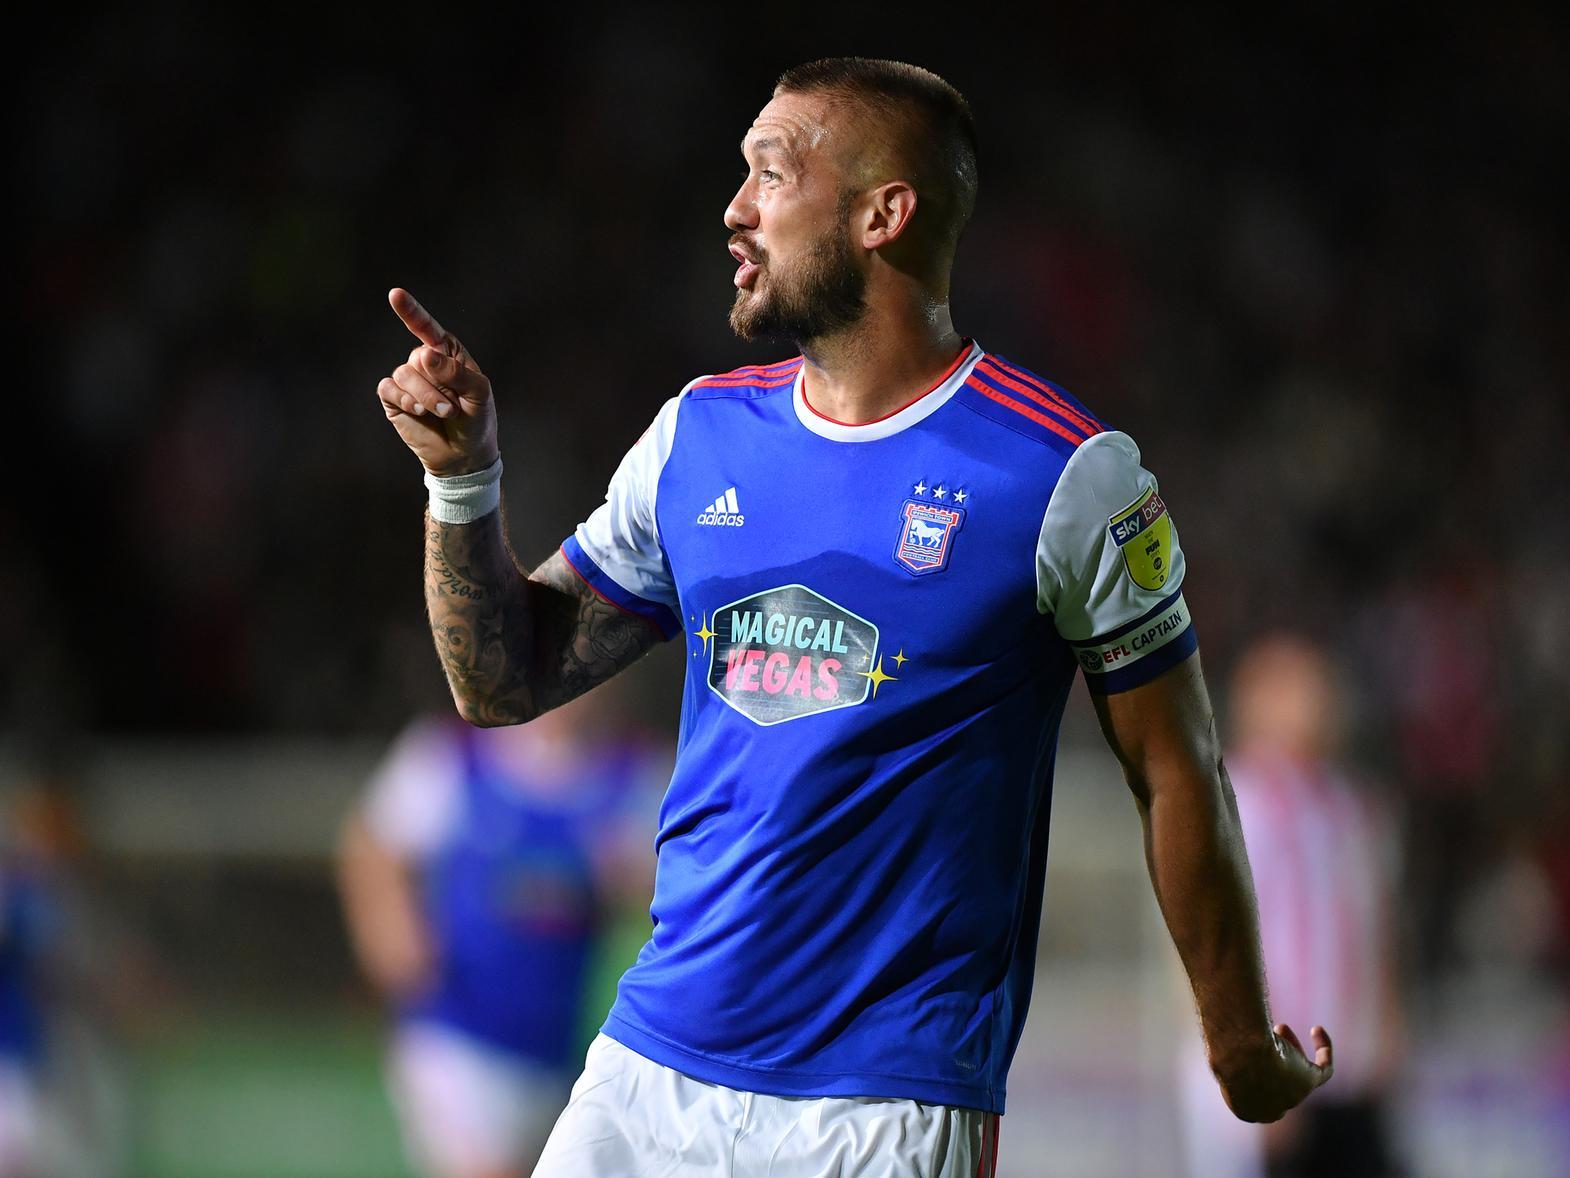 Was sent off for Ipswich Town as his side suffered an away loss to Portsmouth.